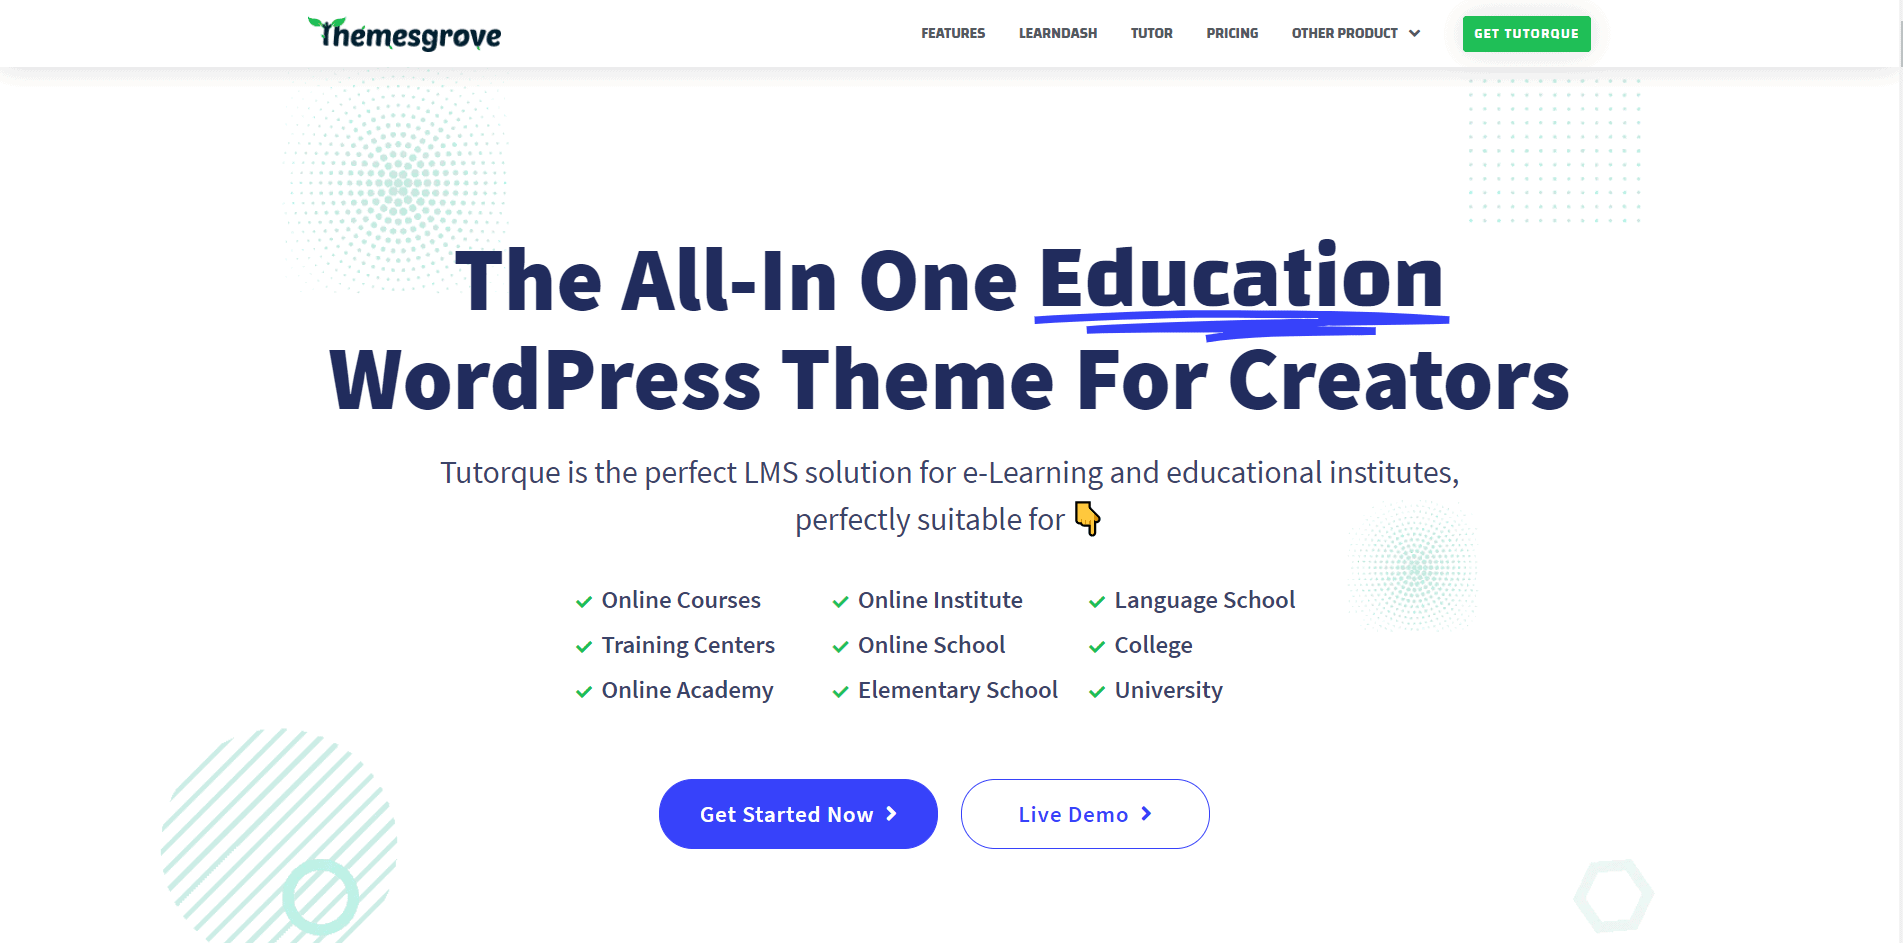 Introducing Tutorque The All-In-One LMS WordPress Theme for Creators 11